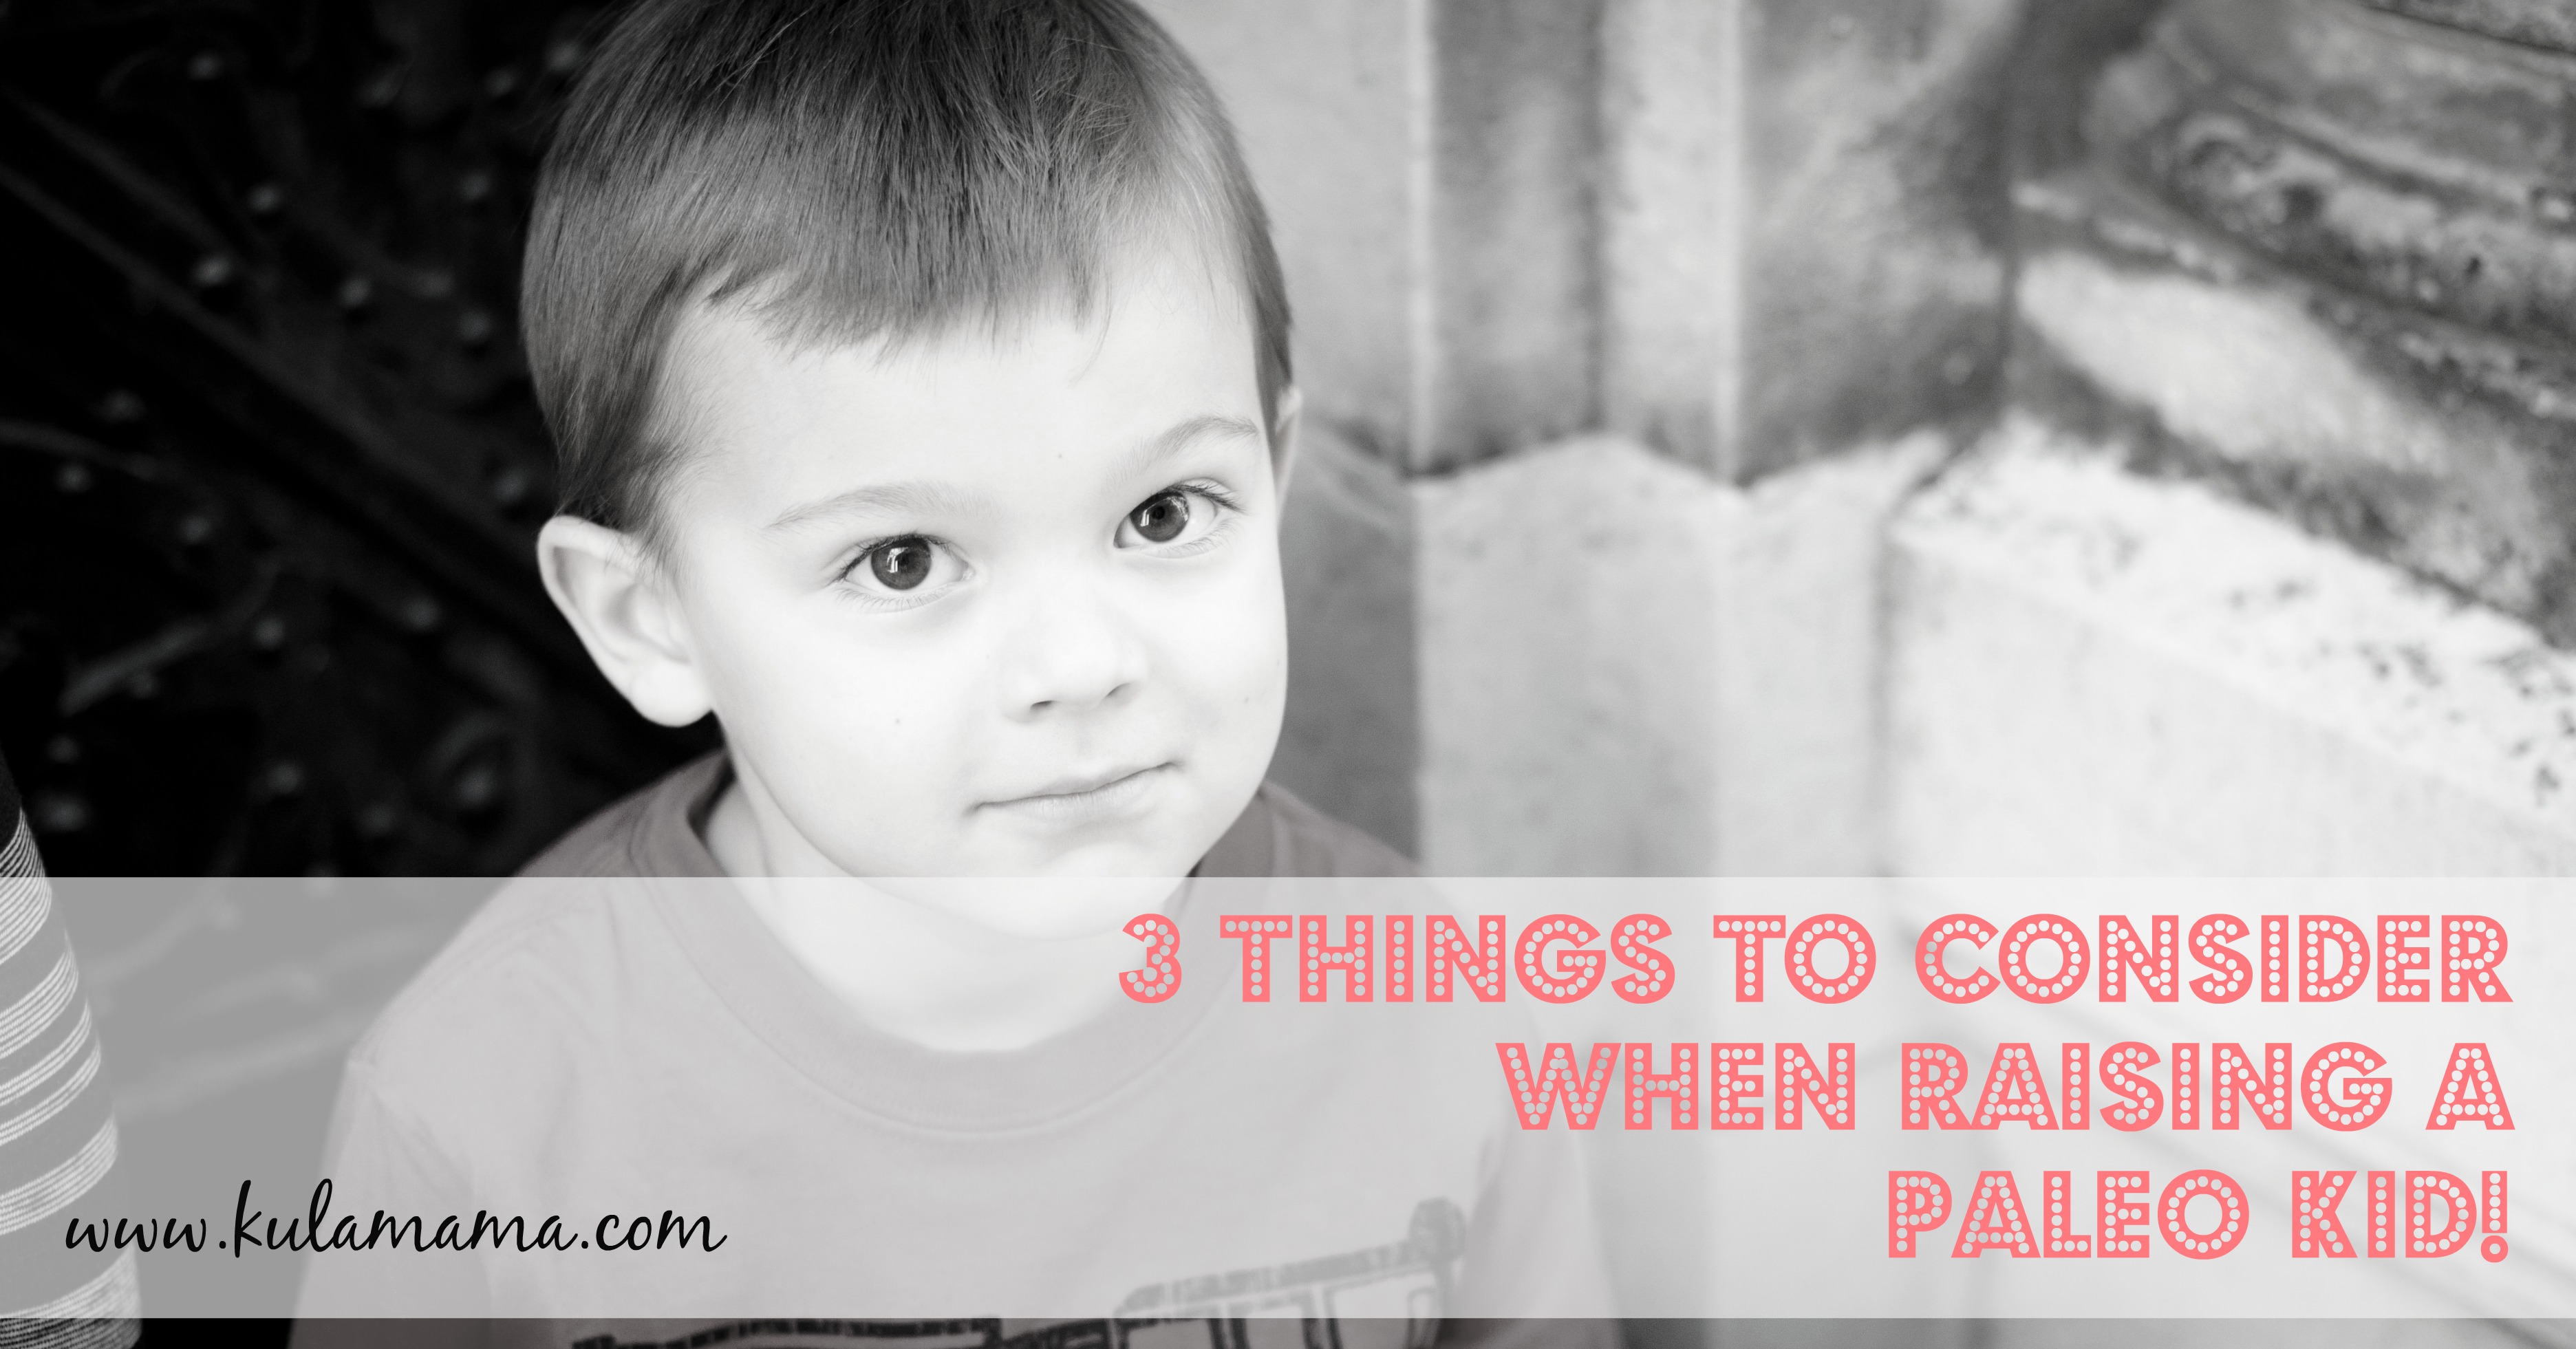 3 Things to Consider When Raising a Paleo Kid!